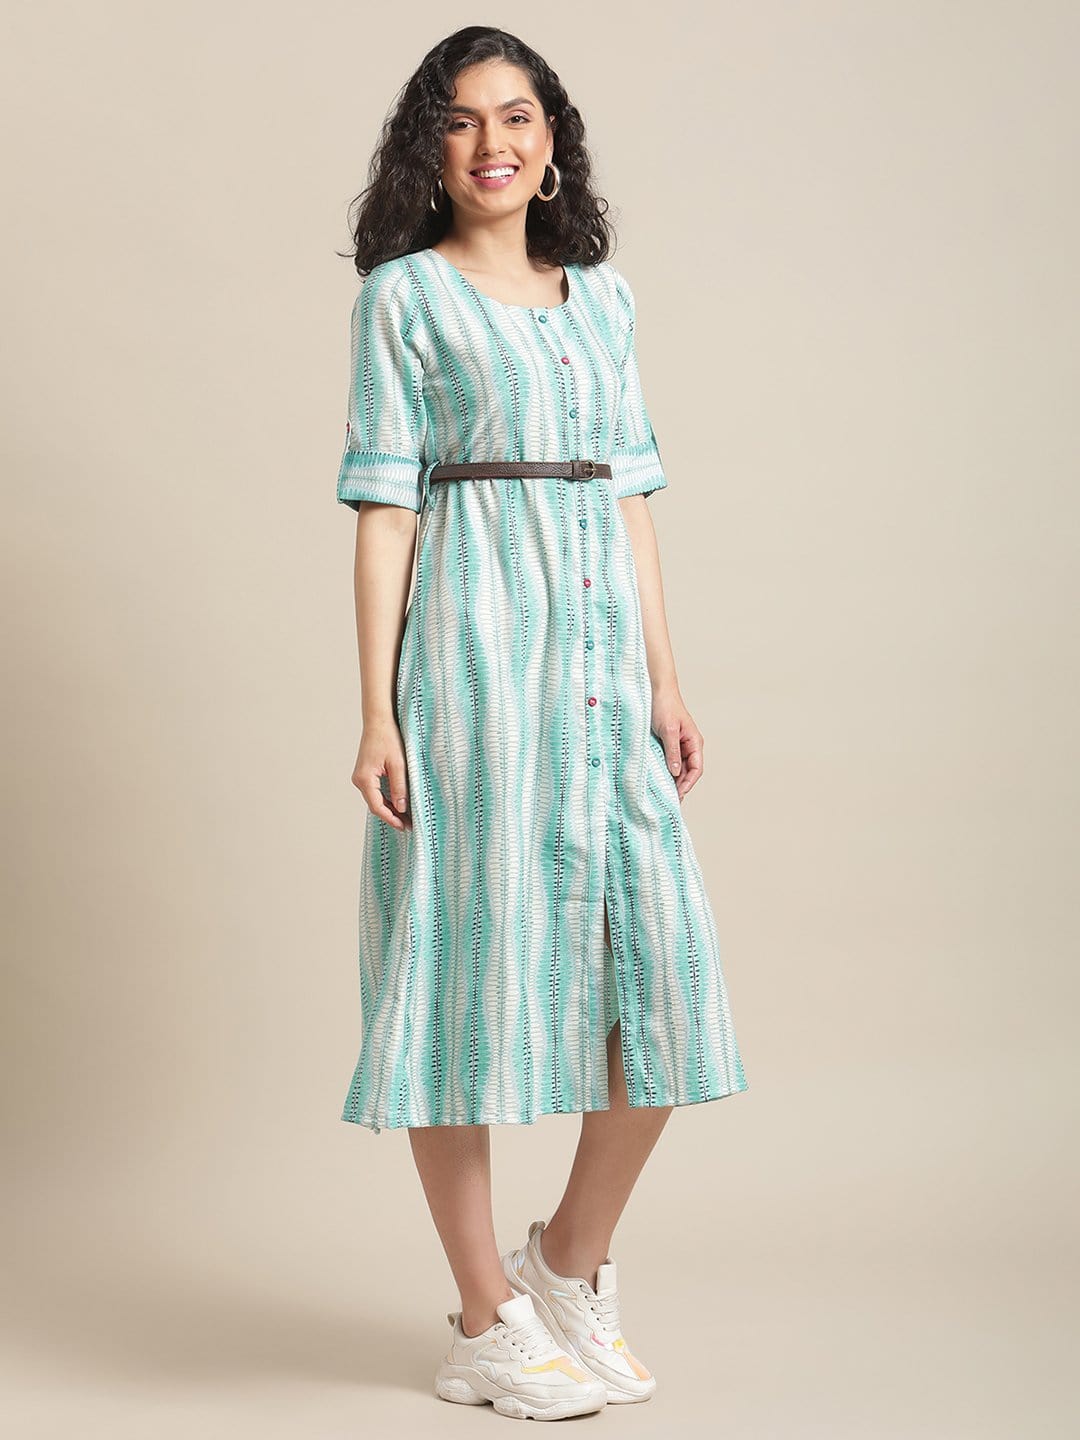 Women's Off-White And Blue Abstract Printed Panelled Kurta With Loops And Leather Belt - Varanga